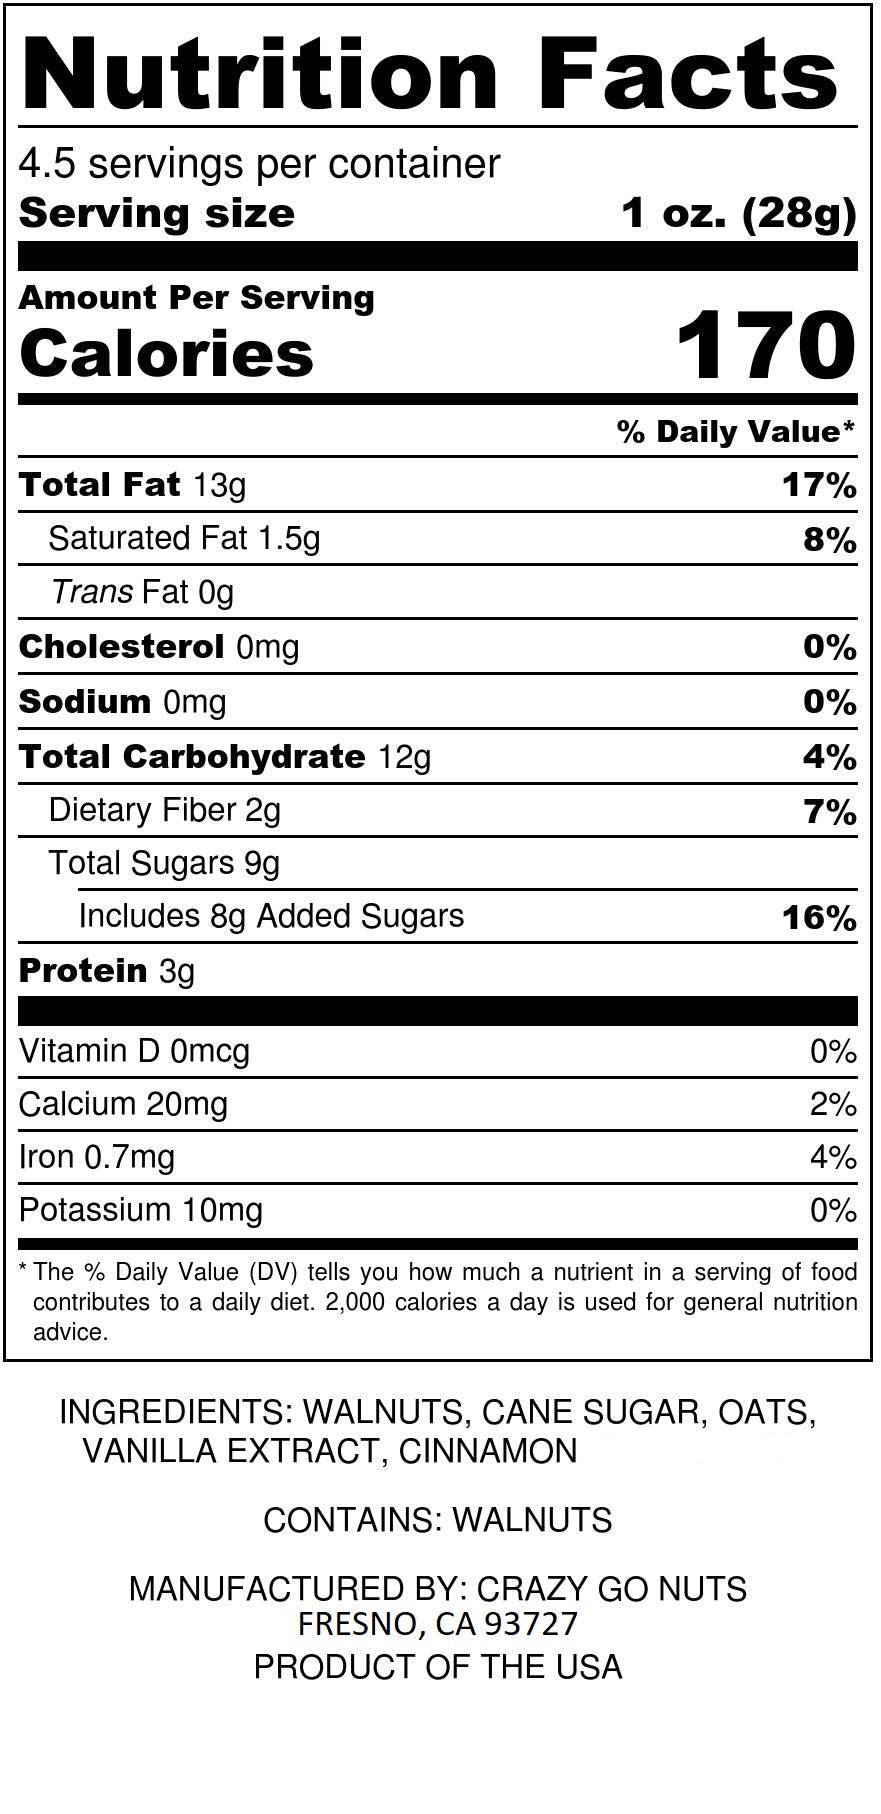 Nutrition panel for oatmeal cookie walnut snacks. Ingredients include walnuts, cane sugar, oats, vanilla extract, and cinnamon